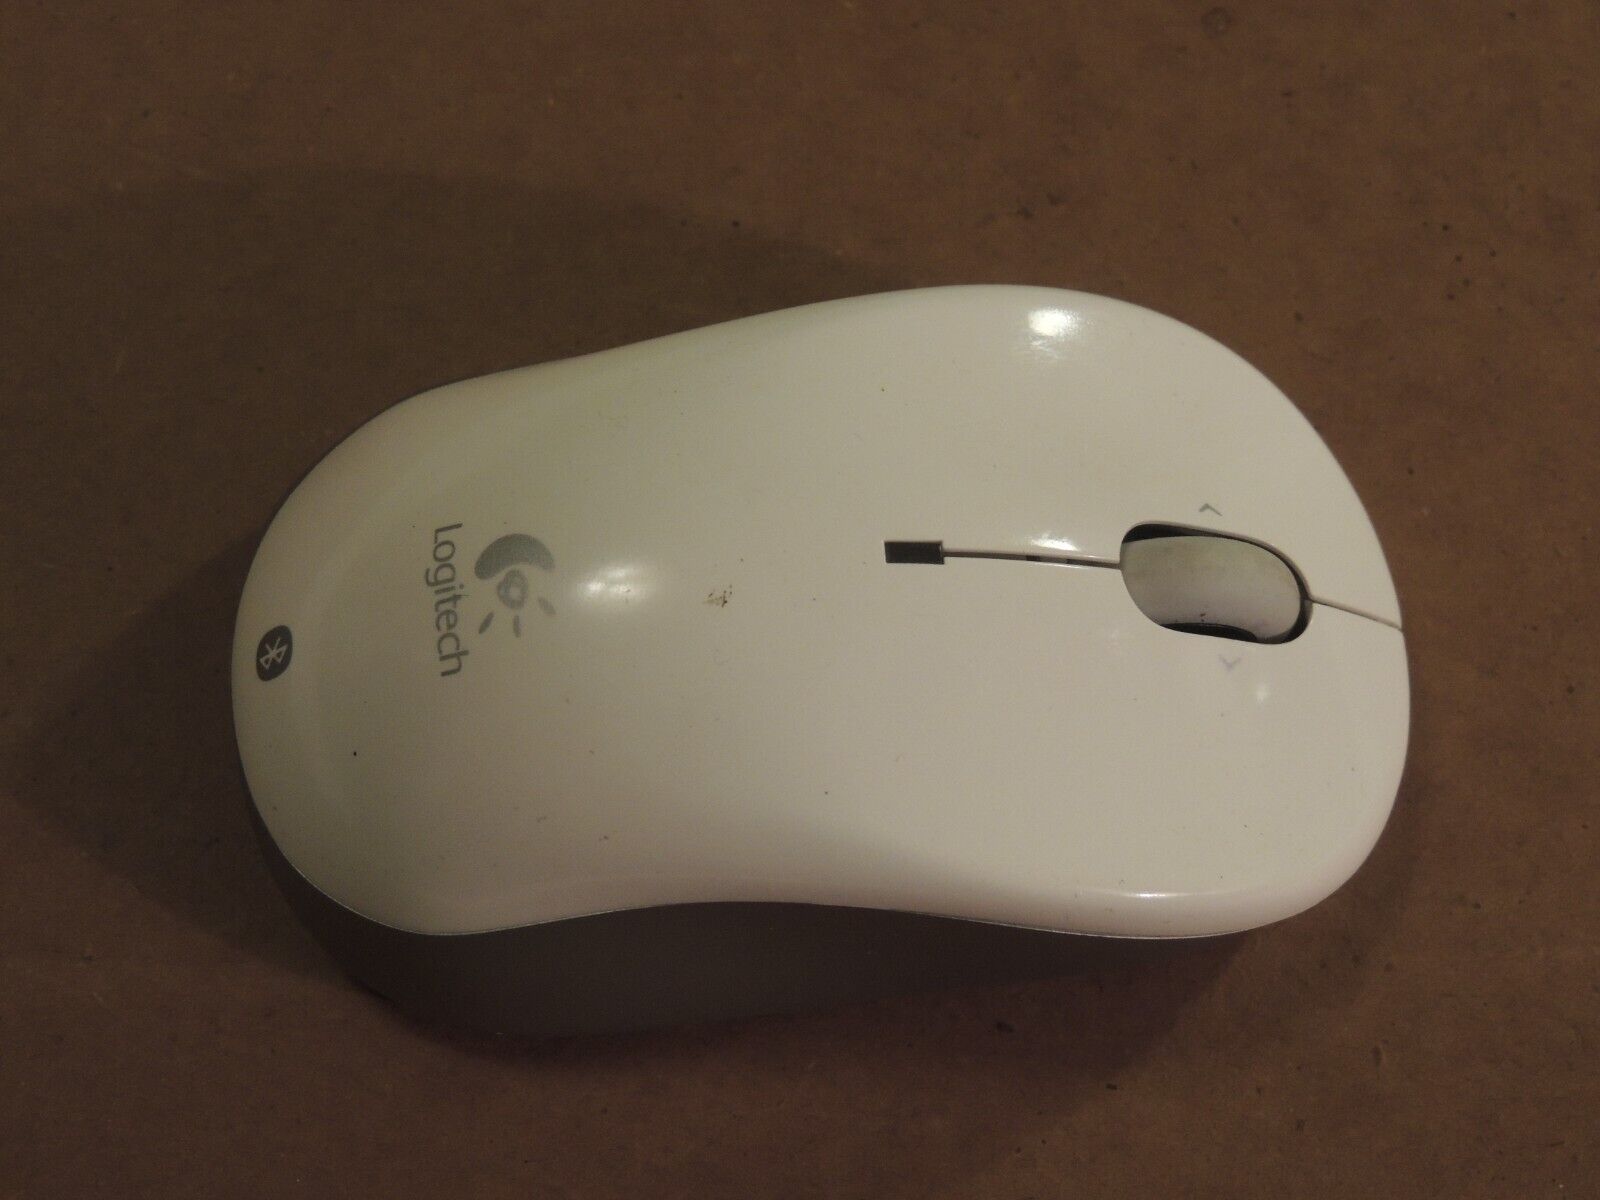 White Logitech M-RCQ142 Wireless Bluetooth Laser Mouse, Does not need Dongle